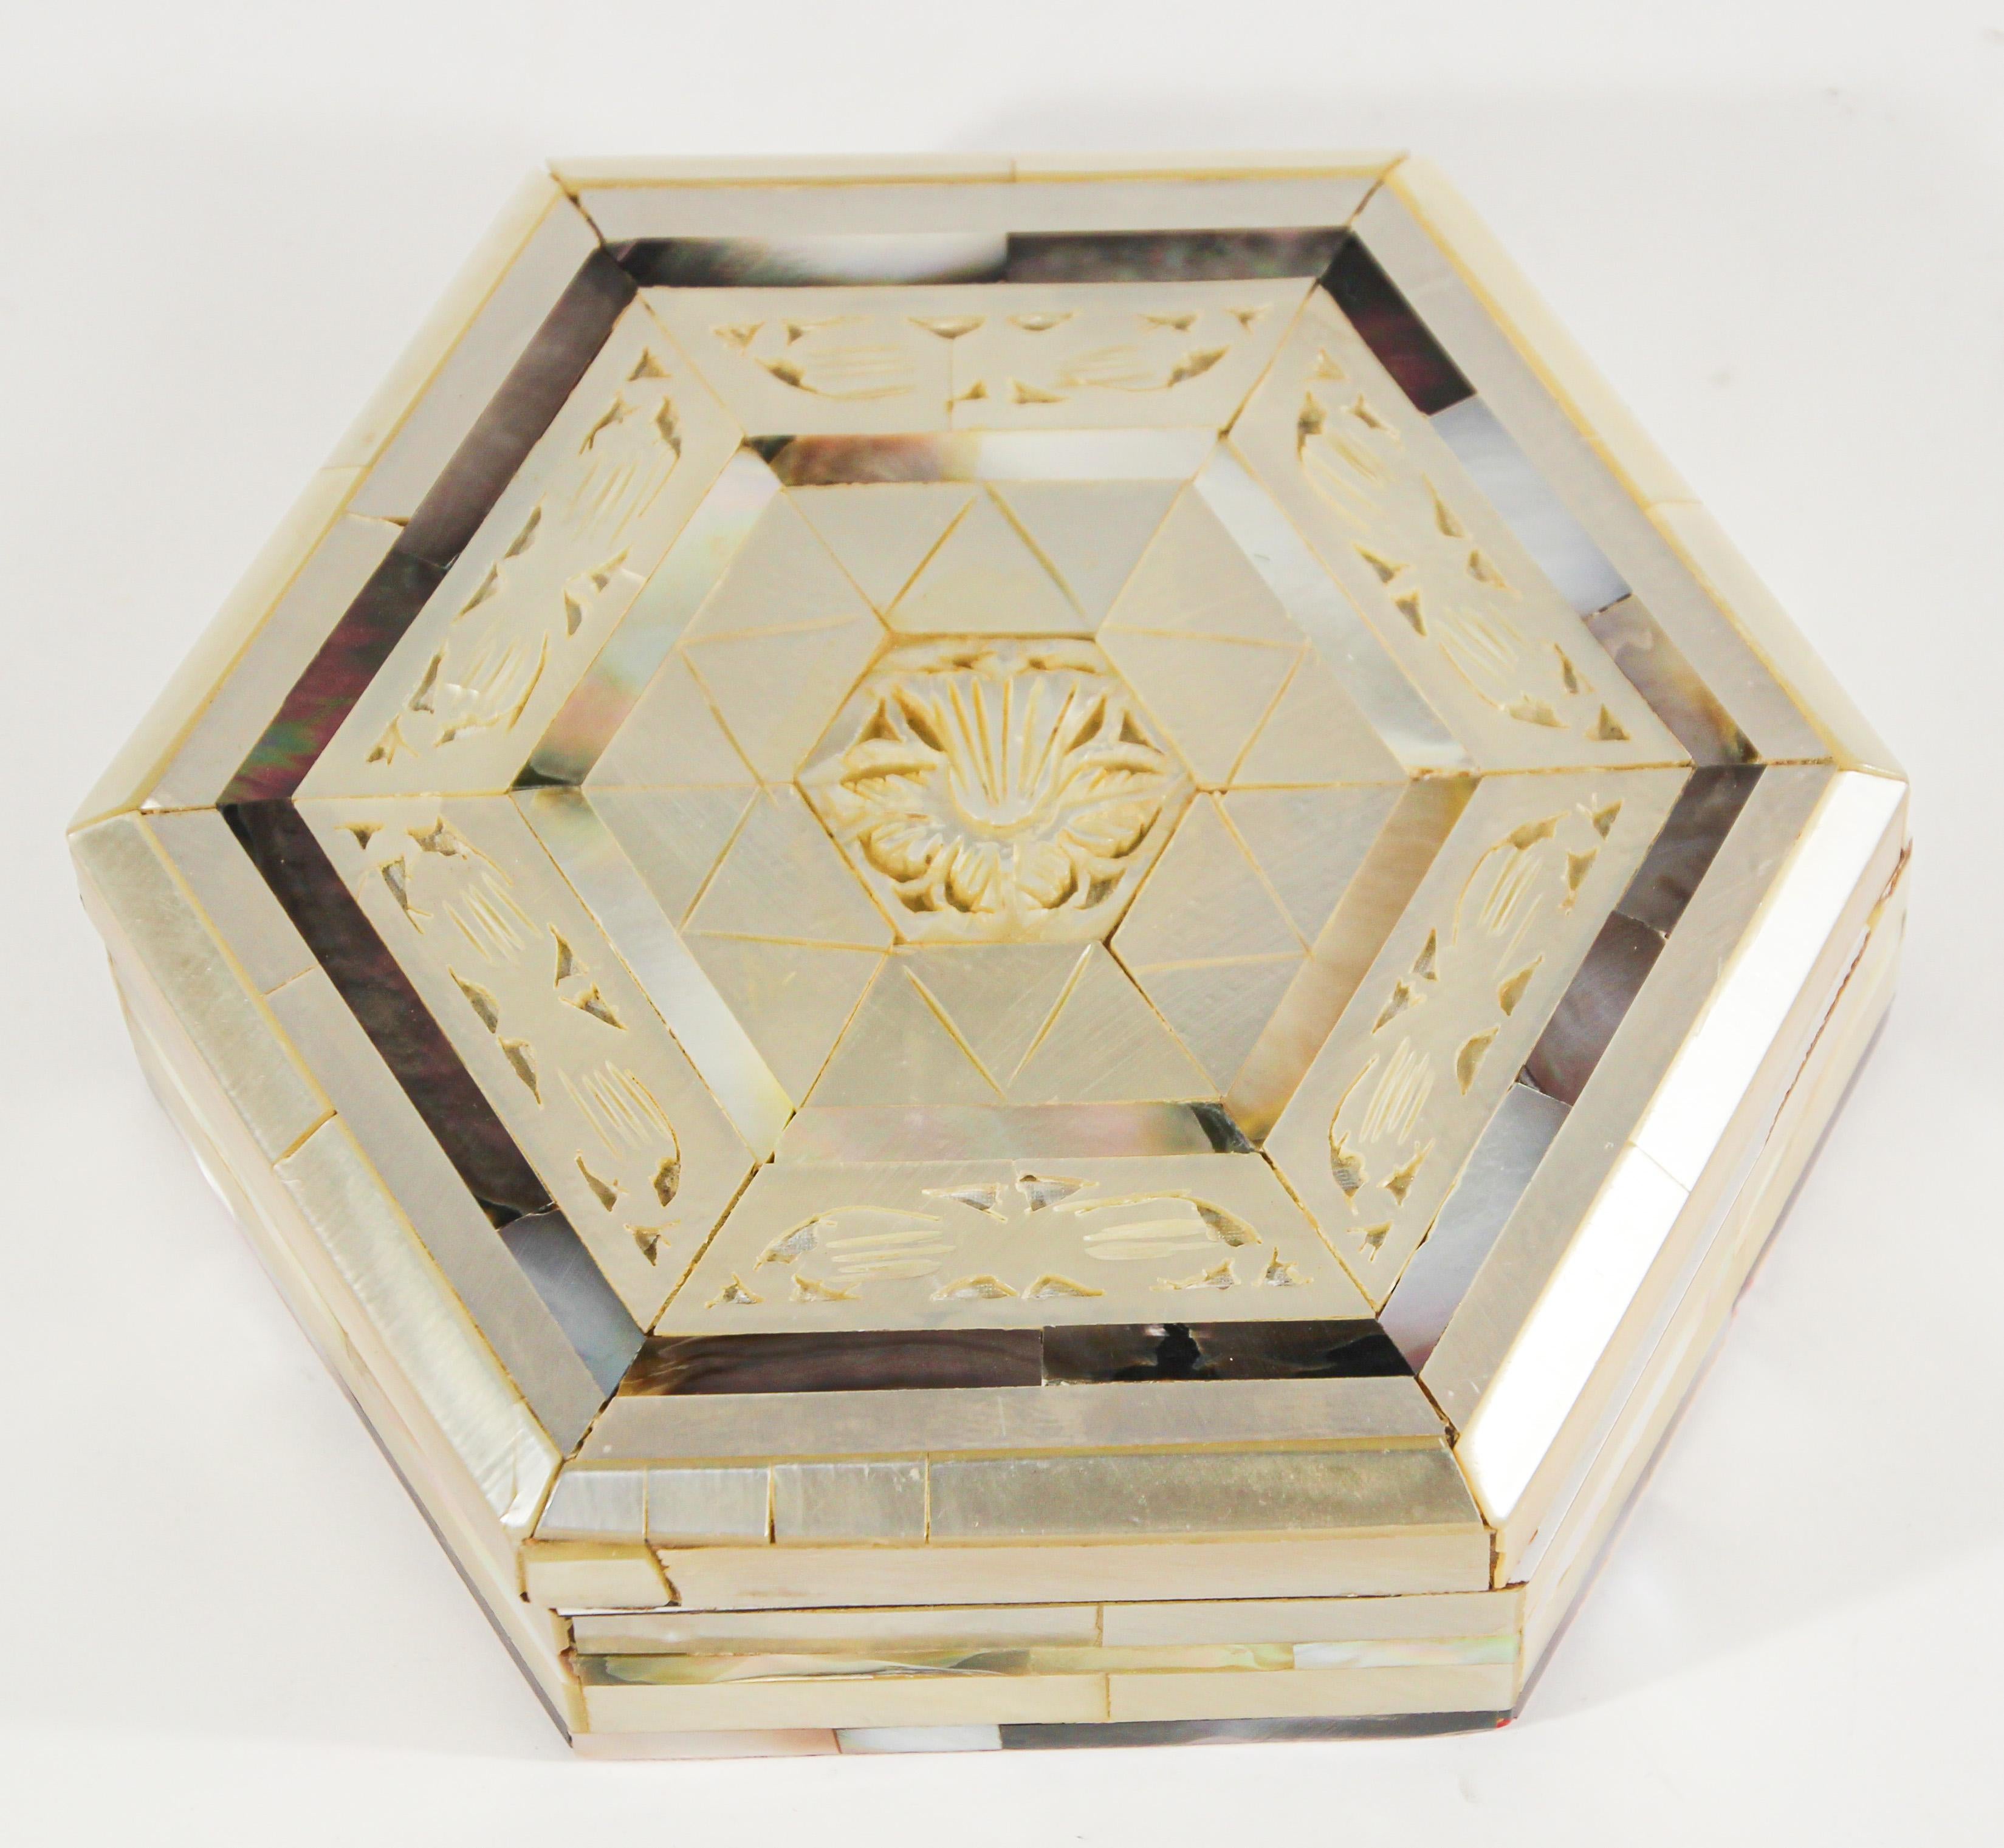 Exquisite handcrafted white mother of pearl inlaid and hand carved lidded box.
Small octagonal Anglo Indian decorative box intricately decorated with Moorish motif designs which have been painstakingly inlaid and carved.
The interior is lined with